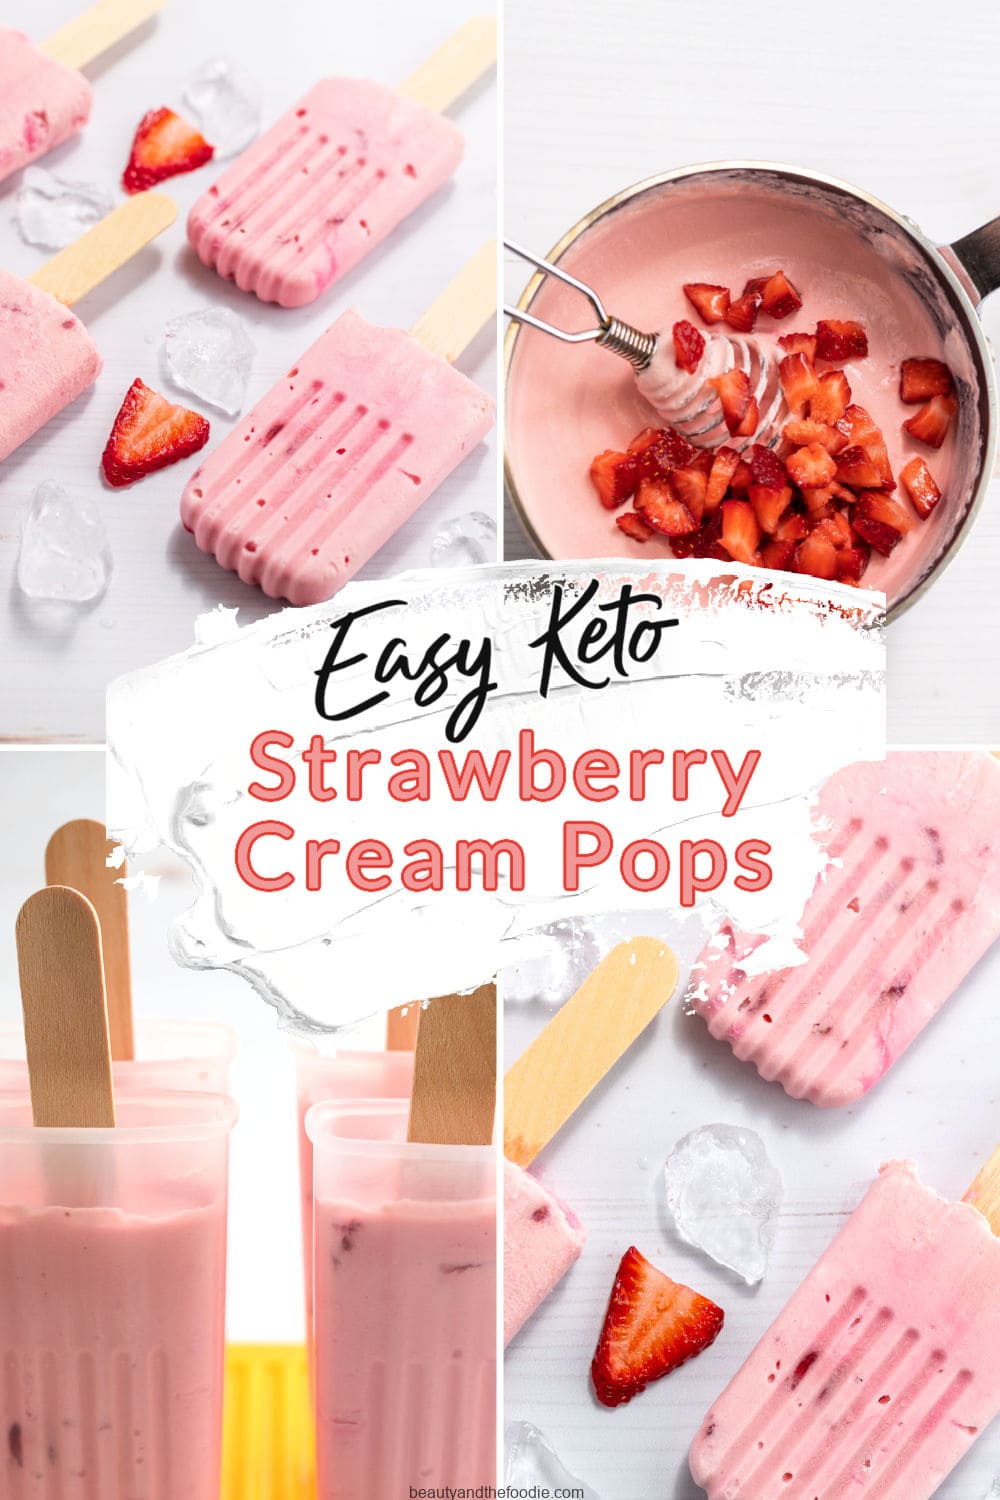 Keto strawberry cream pops with photos showing instructions.